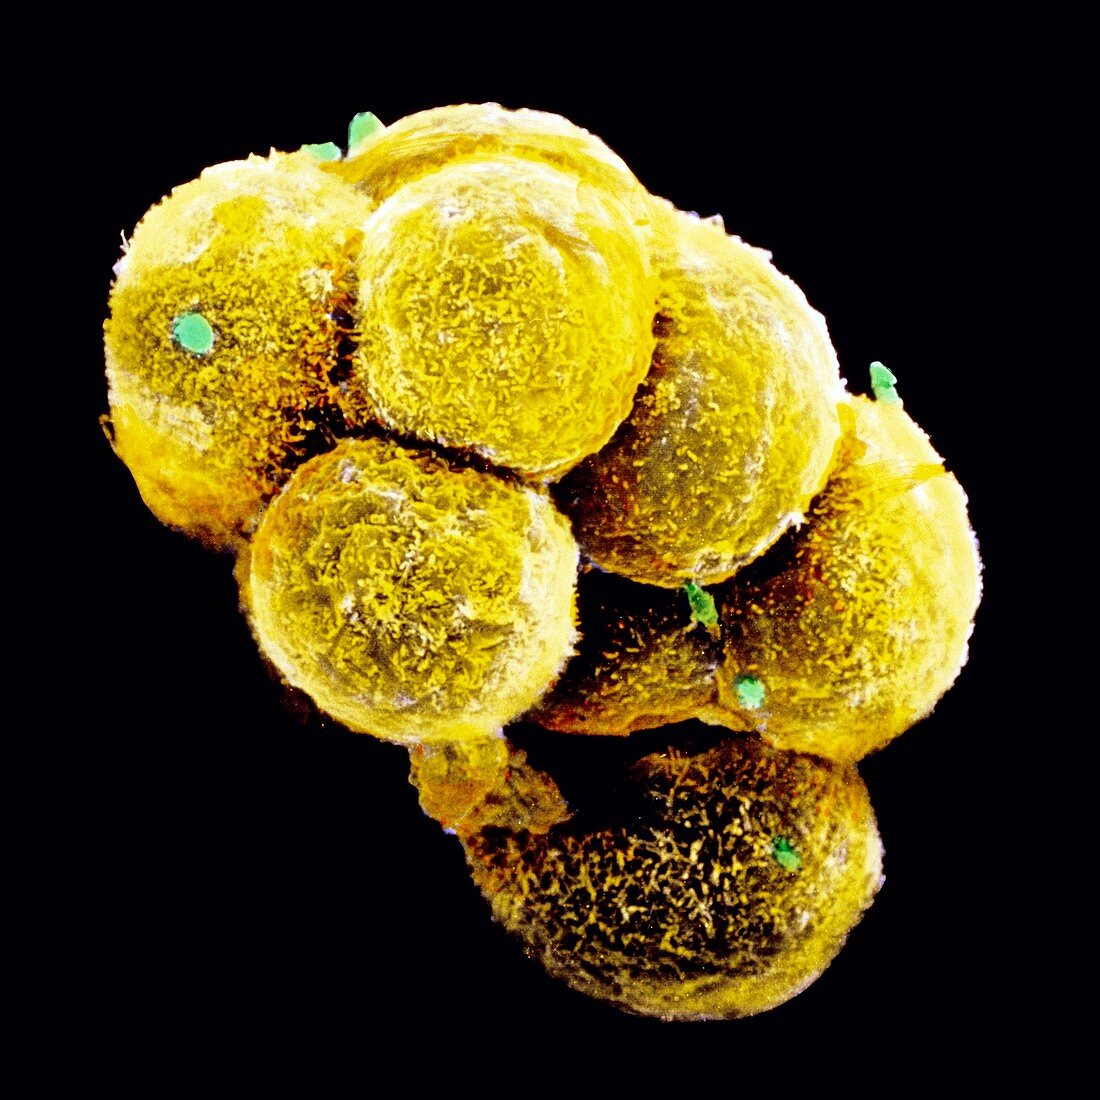 Coloured SEM of an embryo at the stage of morula